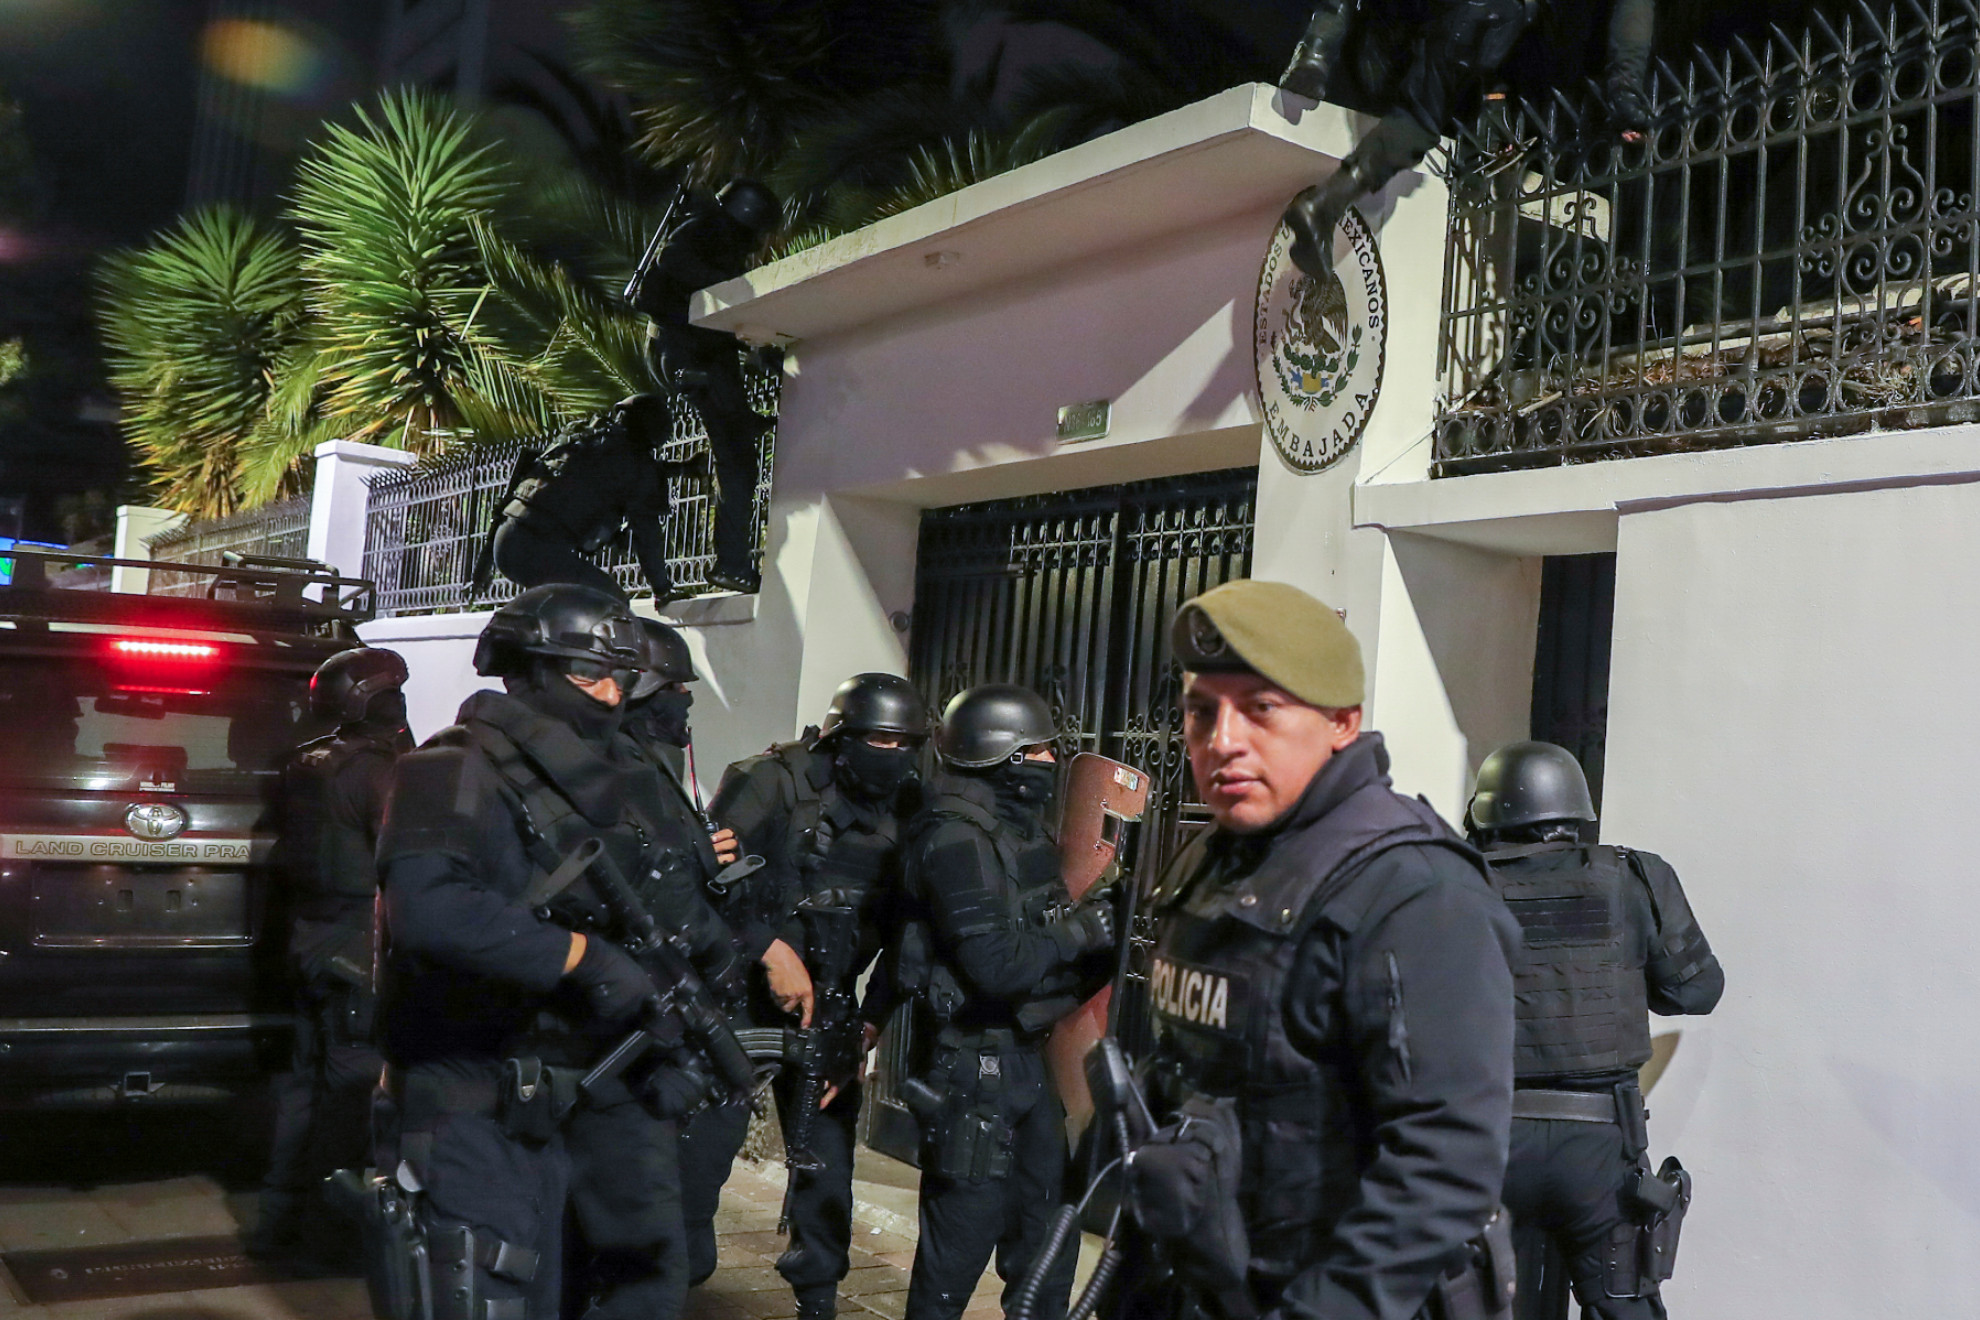 Mexico is breaking diplomatic ties with Ecuador after police stormed the embassy in Quito